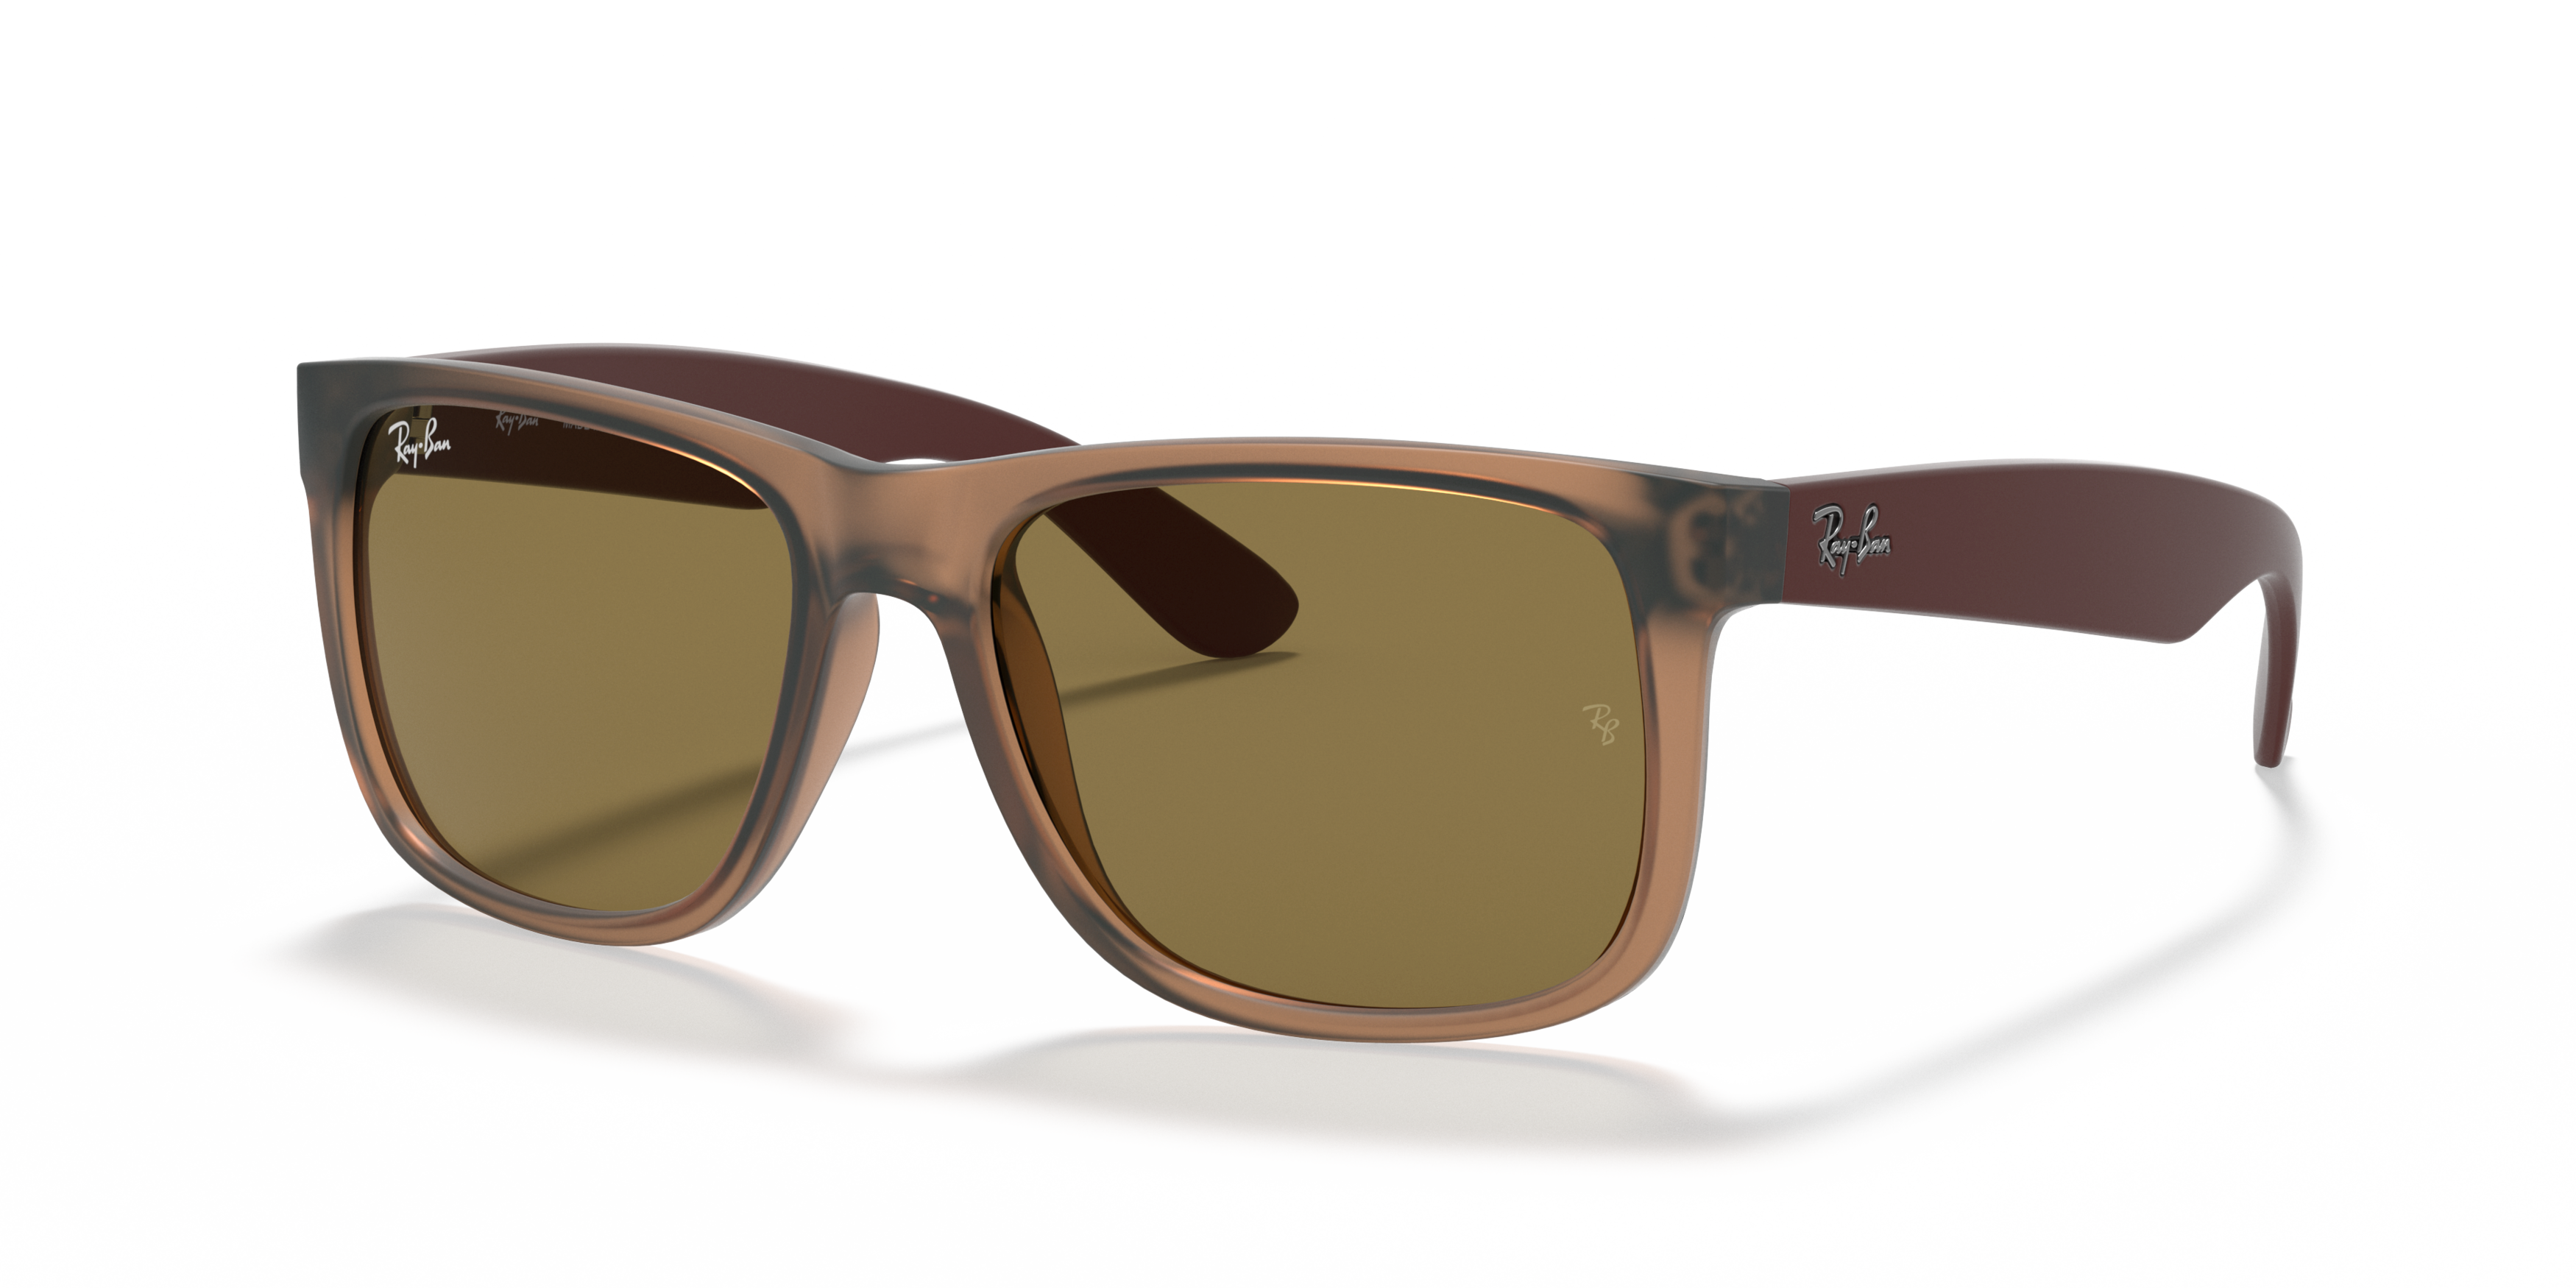 Angle_Left01 Ray-Ban Justin RB4165 651073 Bruin / Bruin